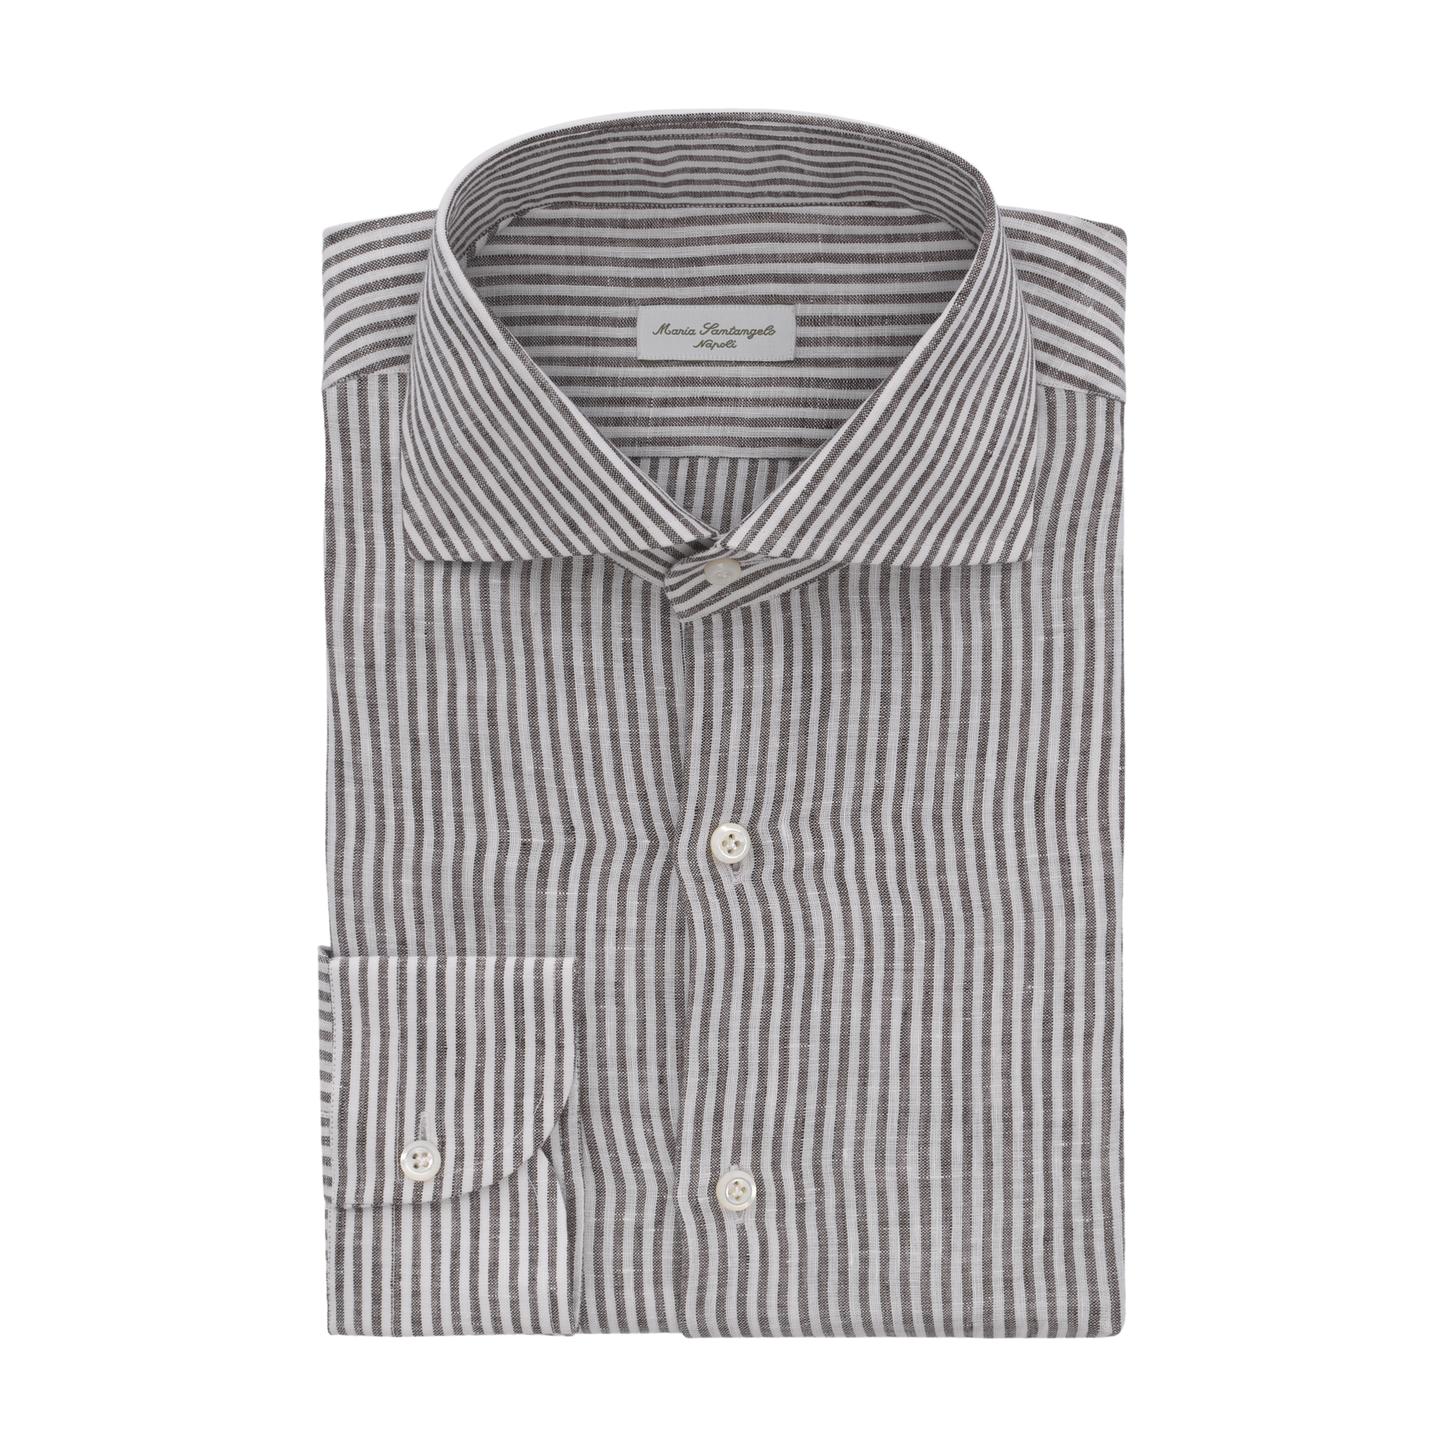 Striped Linen Shirt in Grey and White